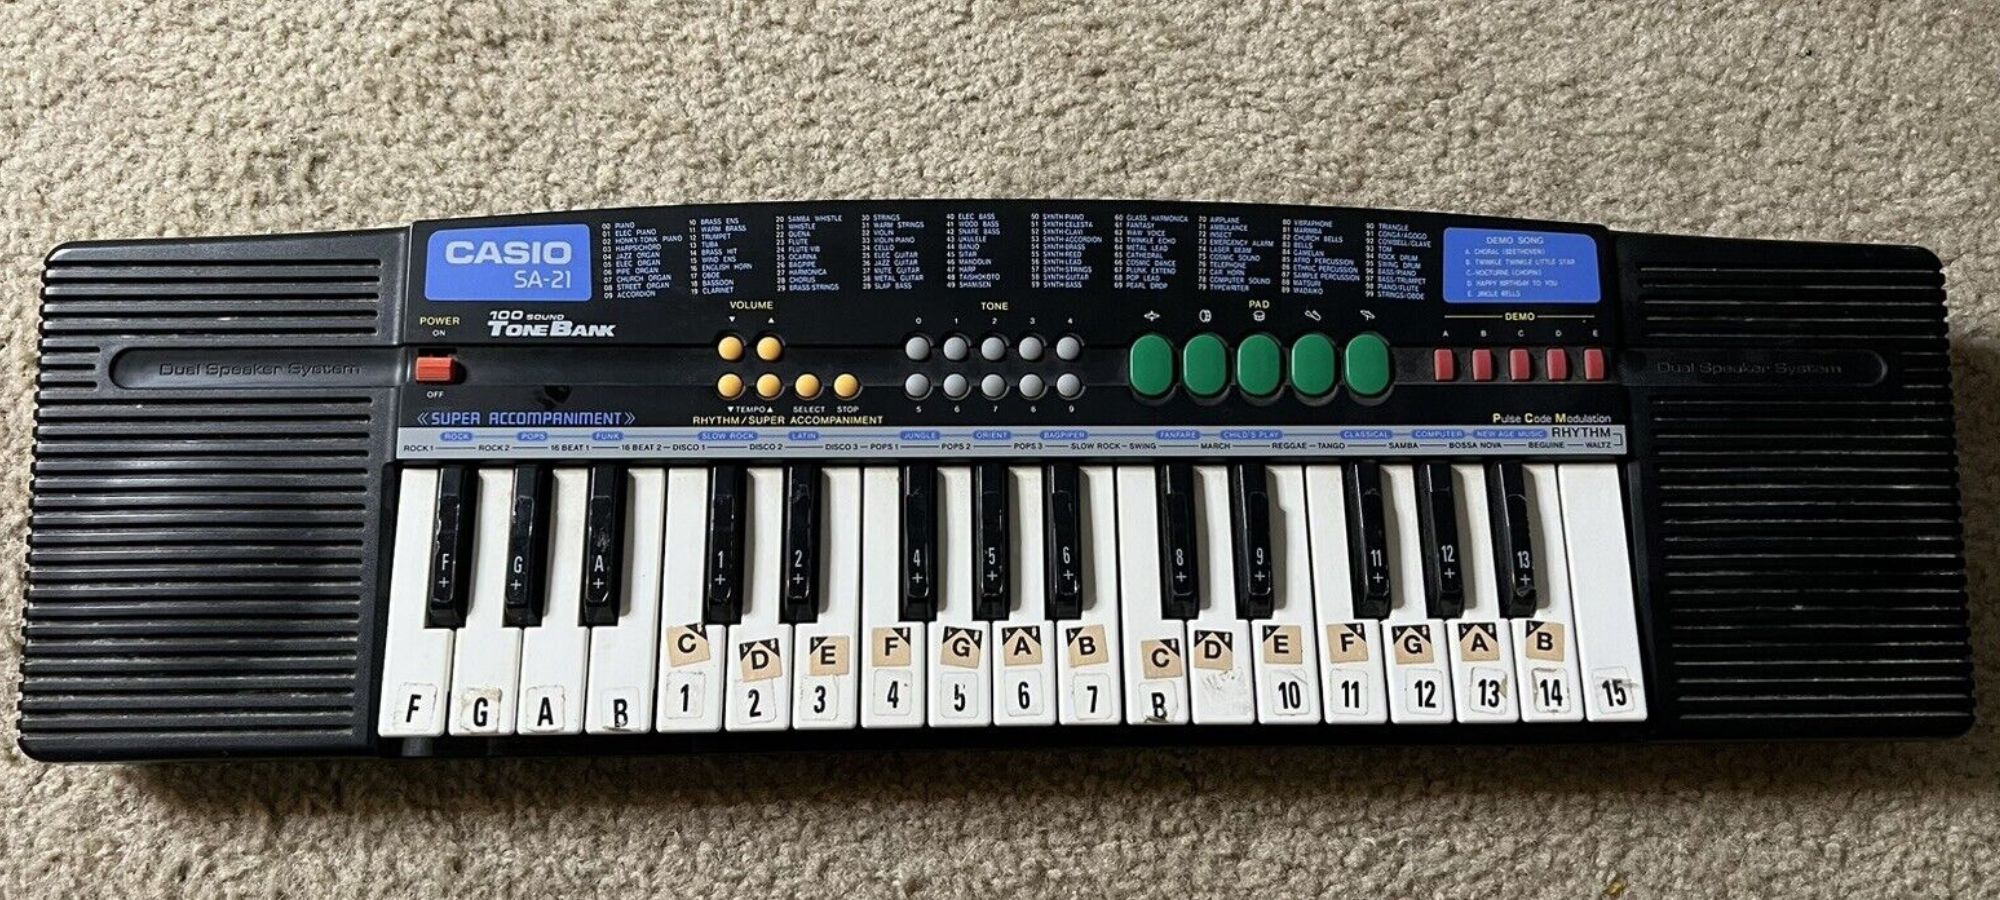 What Synthesizer Chip Does The Casio Sa-21 Use